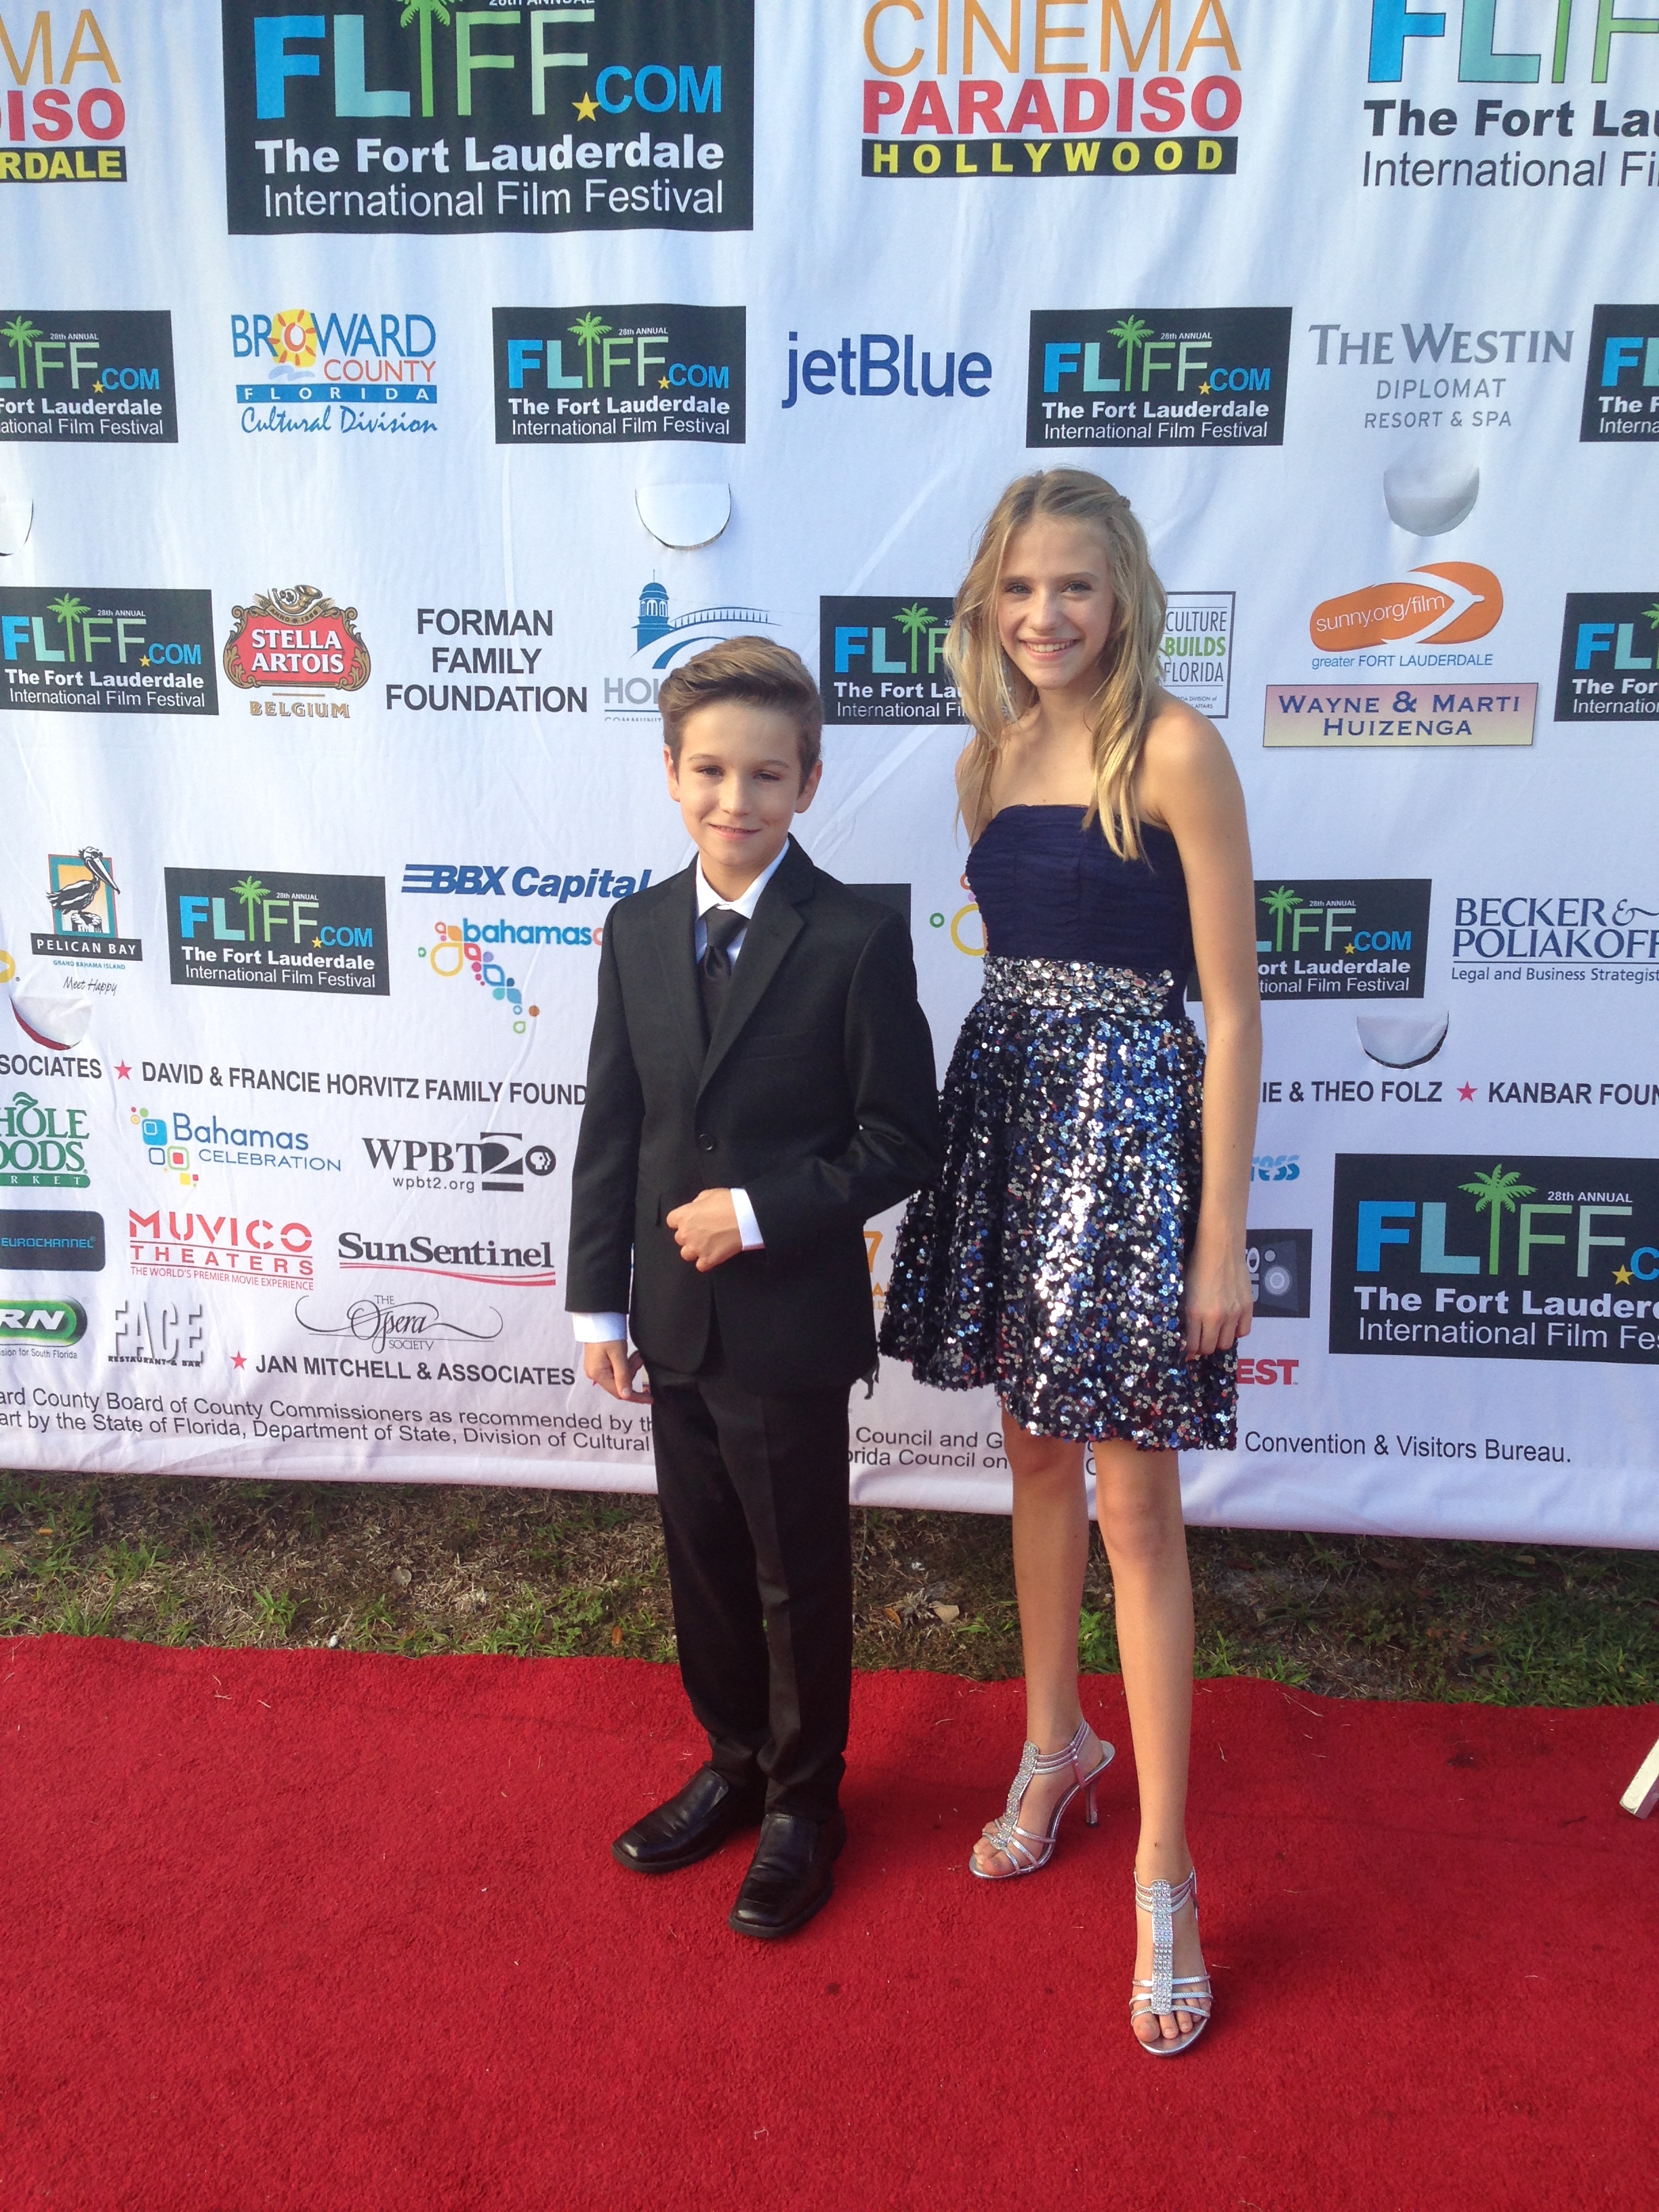 Megan with her co-star Demetri Vardoulias at the premiere of The Life Exhange